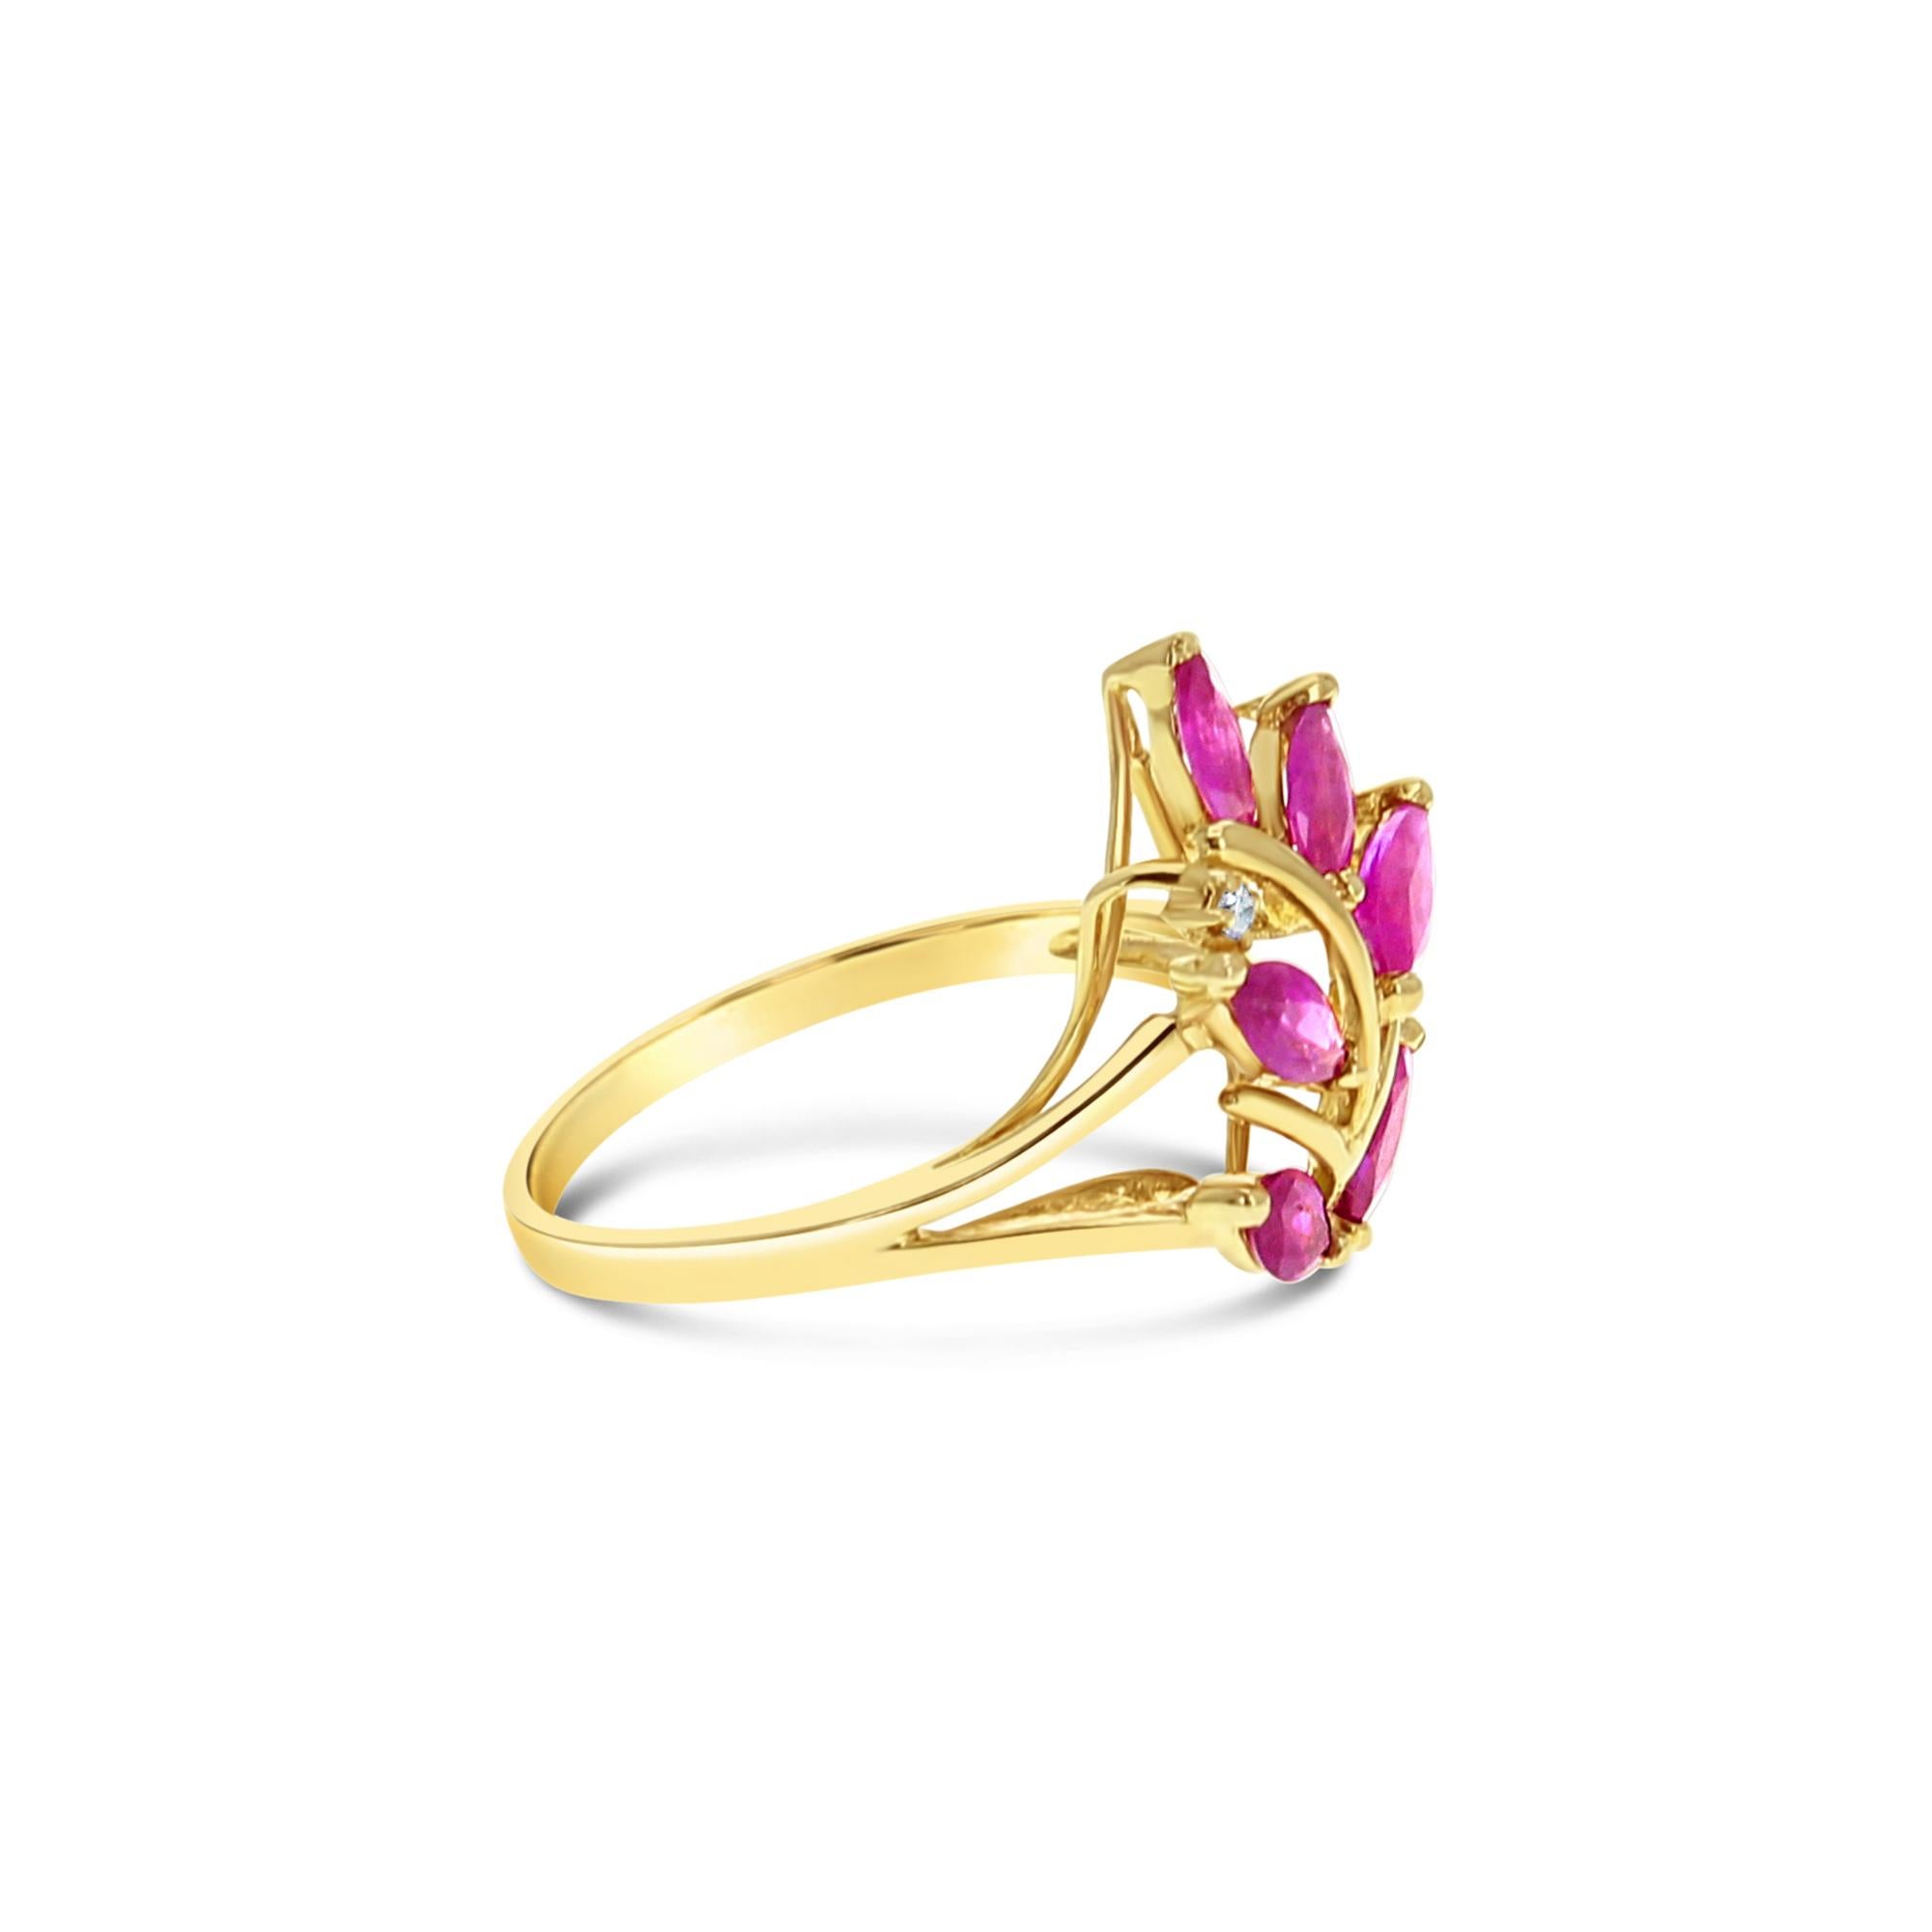 ♥ Product Summary ♥

Main Stone: Ruby & Diamonds
Band Material:  14k Yellow Gold
Stone Shape: Marquise

Diamond and Gemstones are Natural. Not enhanced, simulated or lab-created